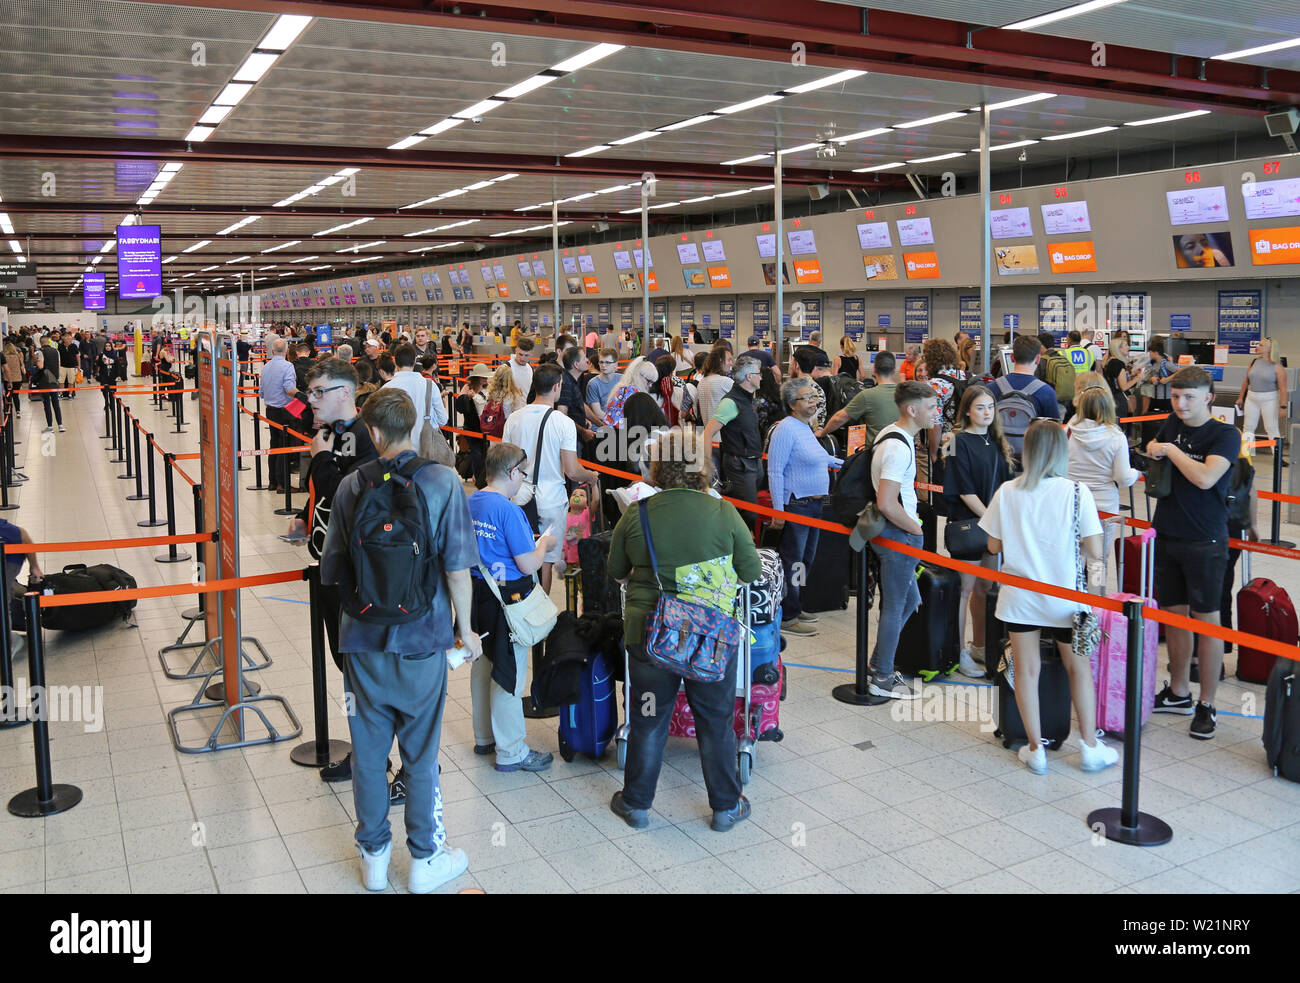 London Luton Airport, UK, check-in hall. Easyjet passengers queue to check in for flights. Luton's check-in hall has 62 desks in a single line. Stock Photo